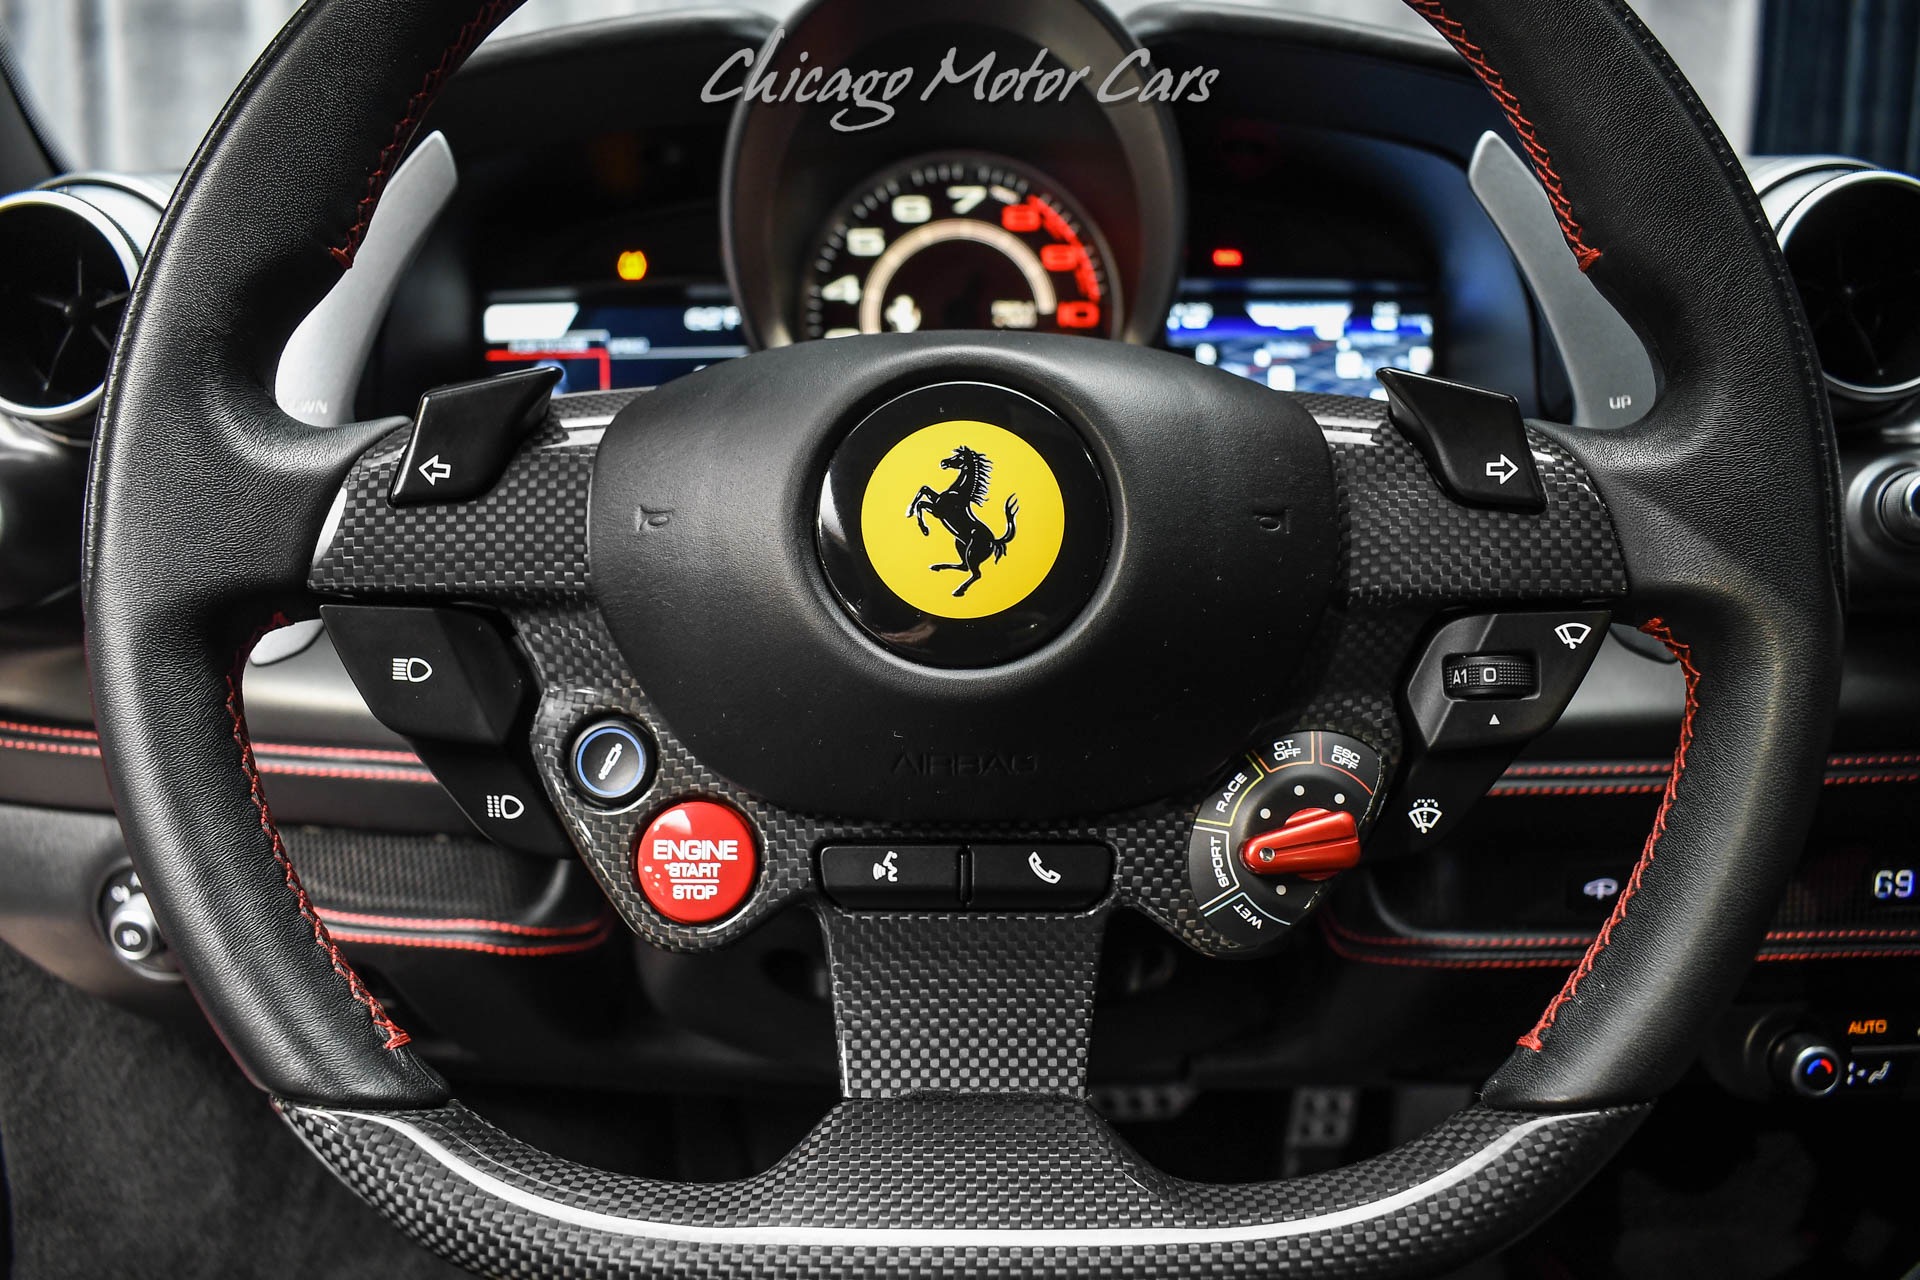 Used-2020-Ferrari-F8-Tributo-Timeless-Rosso-Corsa-Front-Lift-710hp-Only-6K-Miles